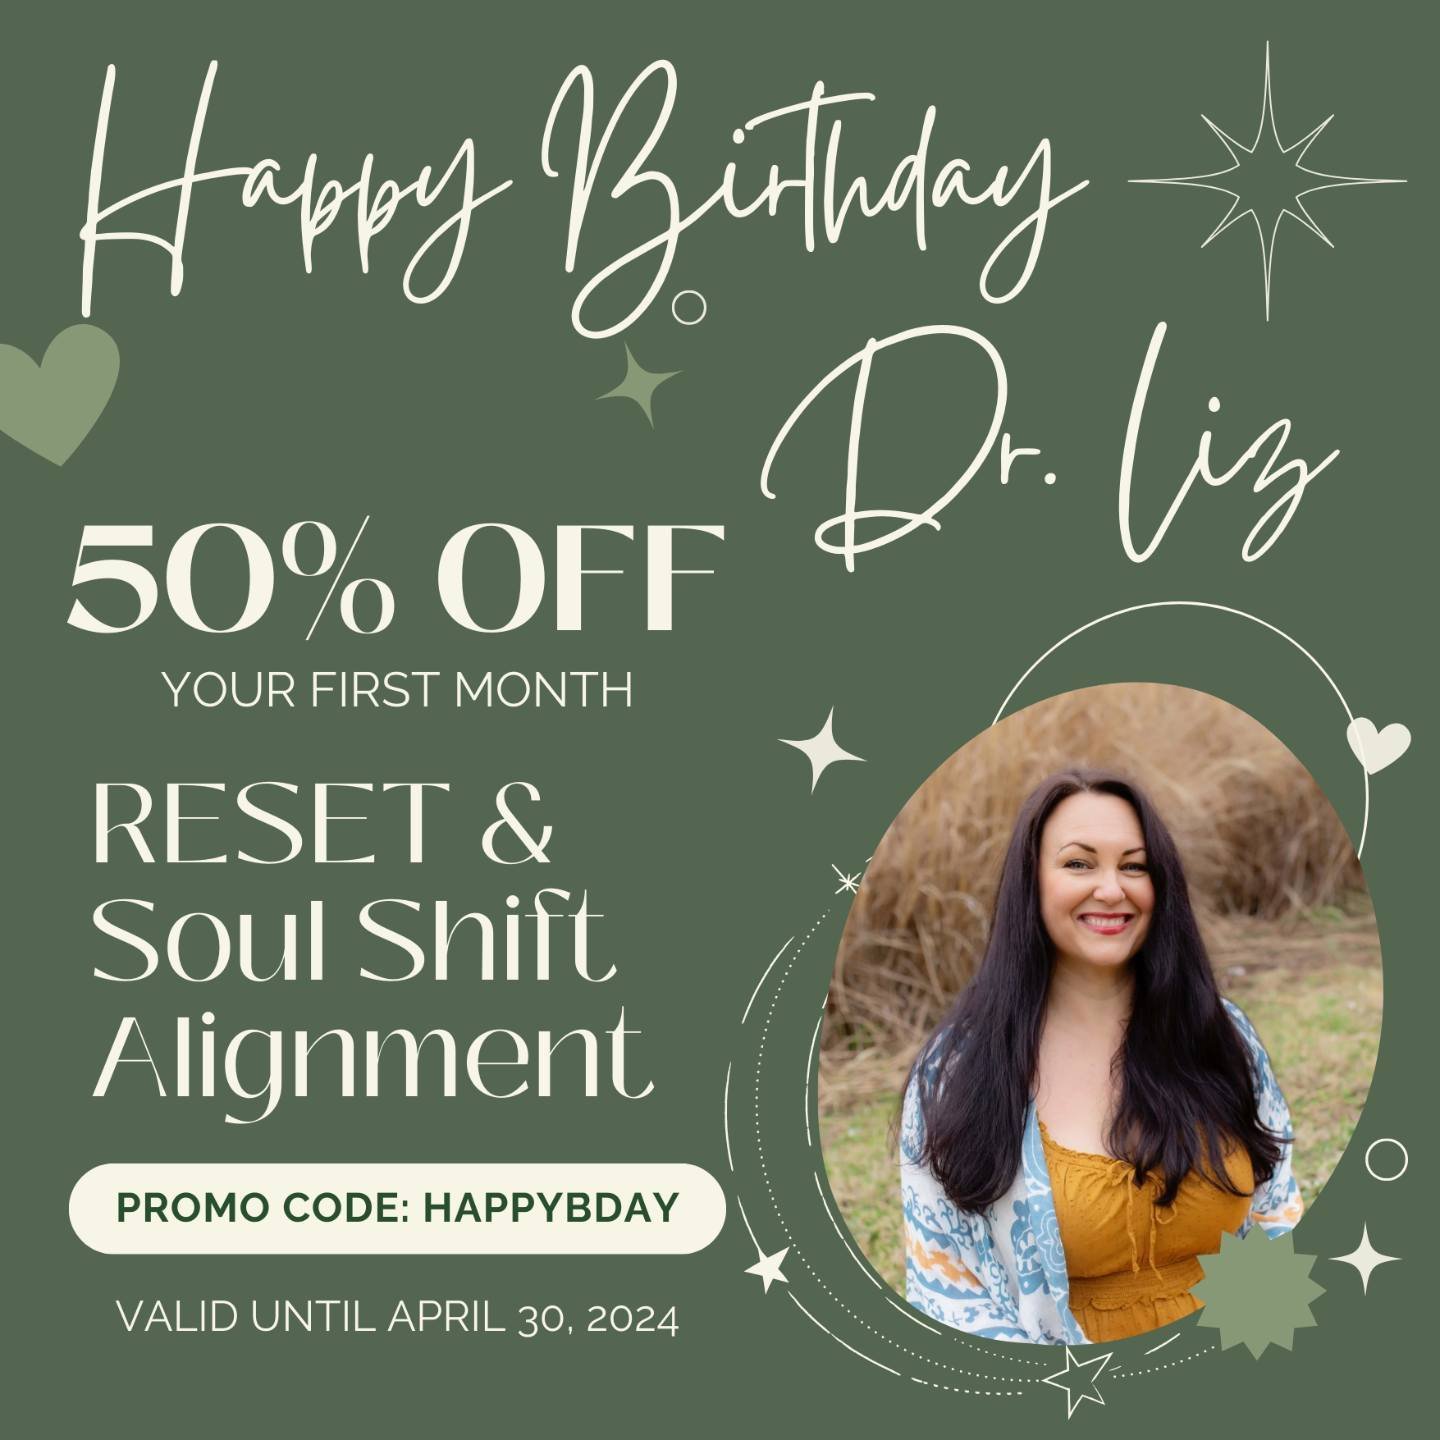 Happy Birthday Dr. Liz!! 🥳 🎂 
But YOU get a gift. Use code &quot;HAPPYBDAY&quot; for 50% off of your first month of RESET or Soul Shift Alignment! 🎁
.
Link in bio to join. Offer expires 4/30/24. Valid for new members only.
.
.
.
#innerchild #energ